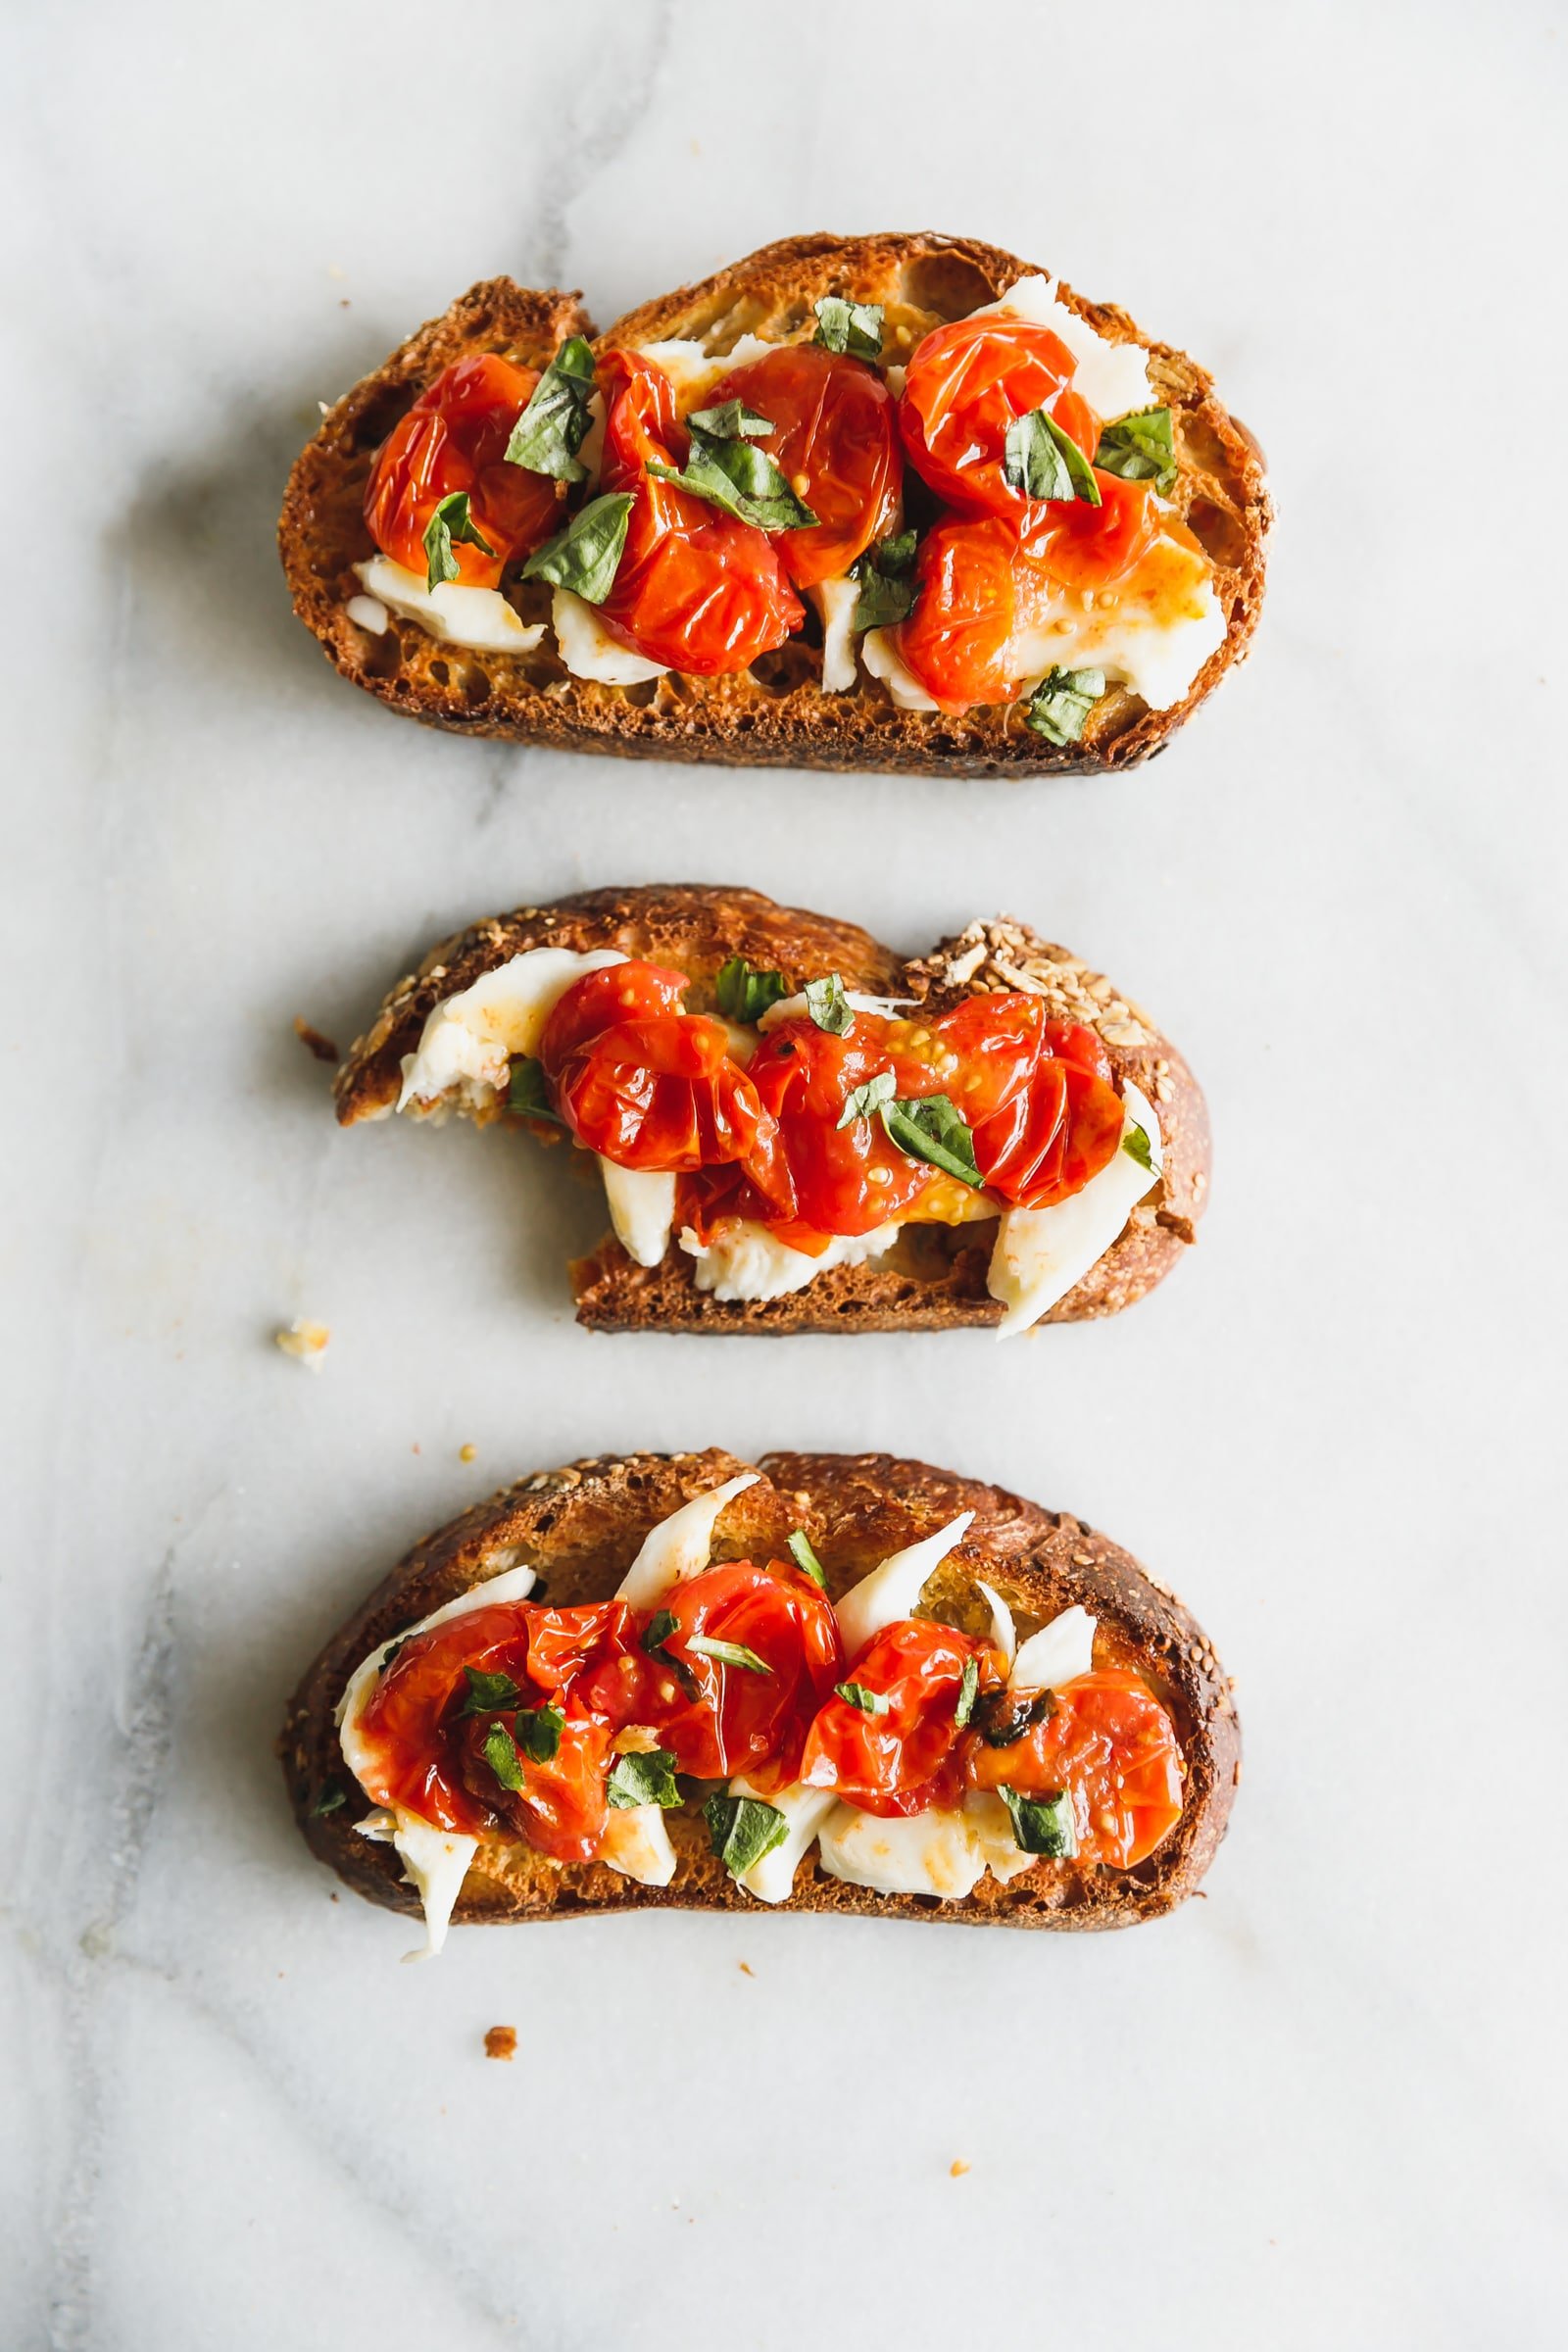 Caprese salad on toast! Cherry tomatoes are roasted until bursting and lightly browned then served with fresh mozzarella on thick, olive-oil-toasted bread.